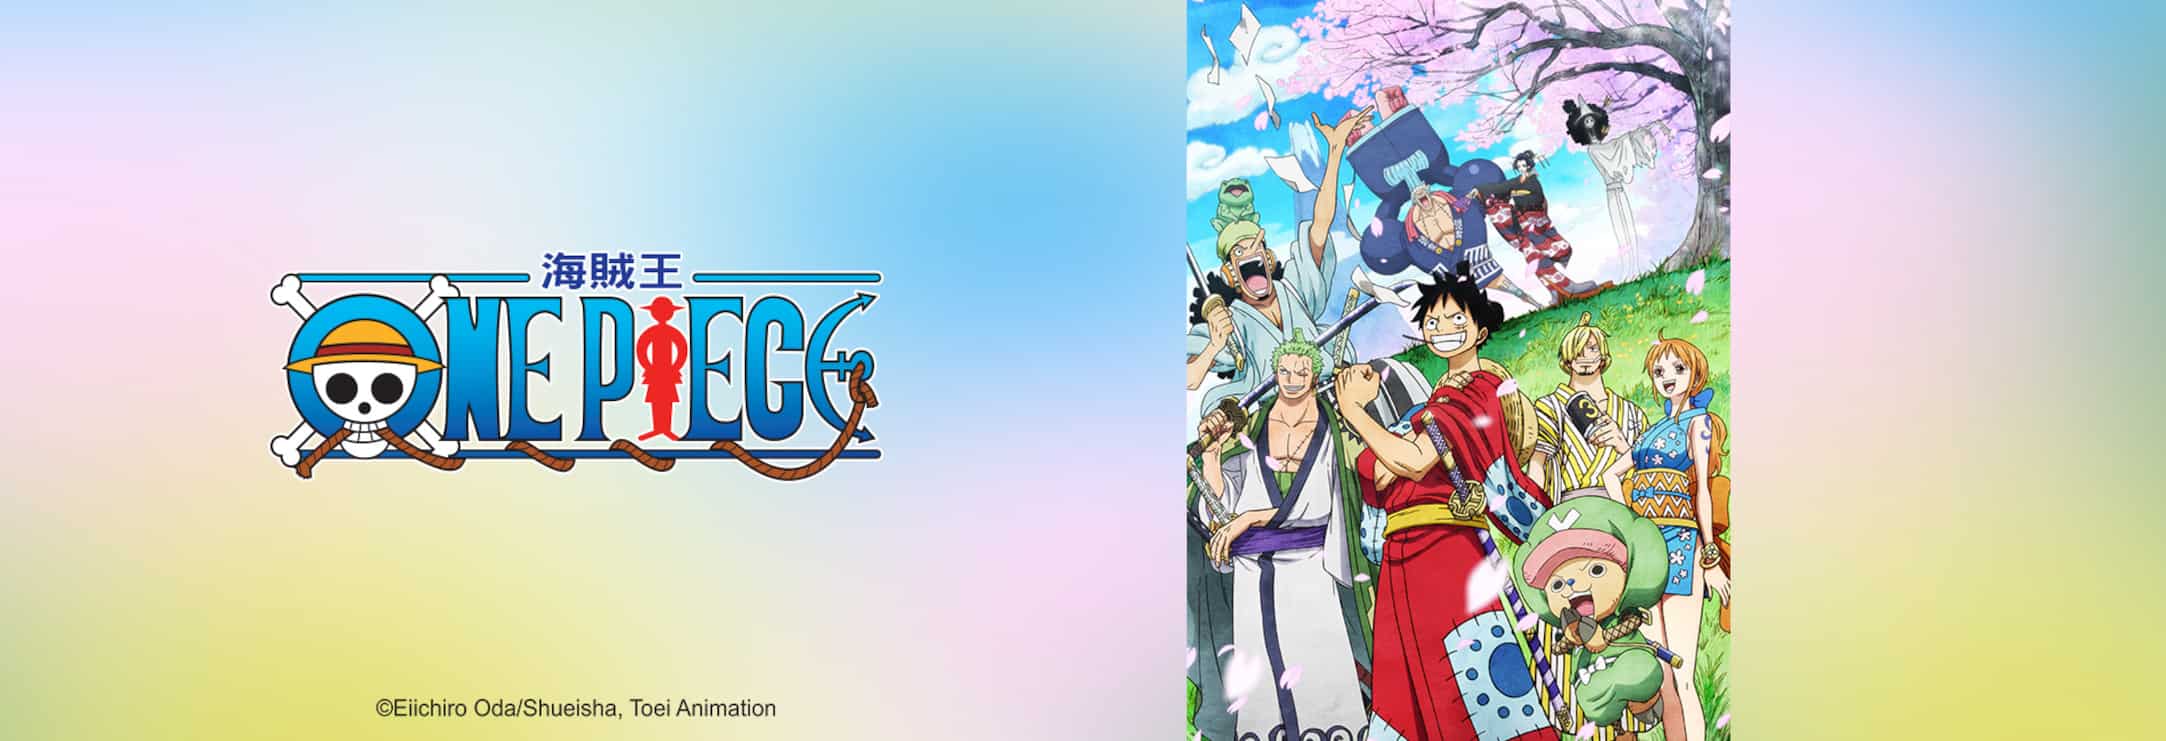 Stream And Watch Full Tv Series One Piece Online With Subtitles Viu Malaysia